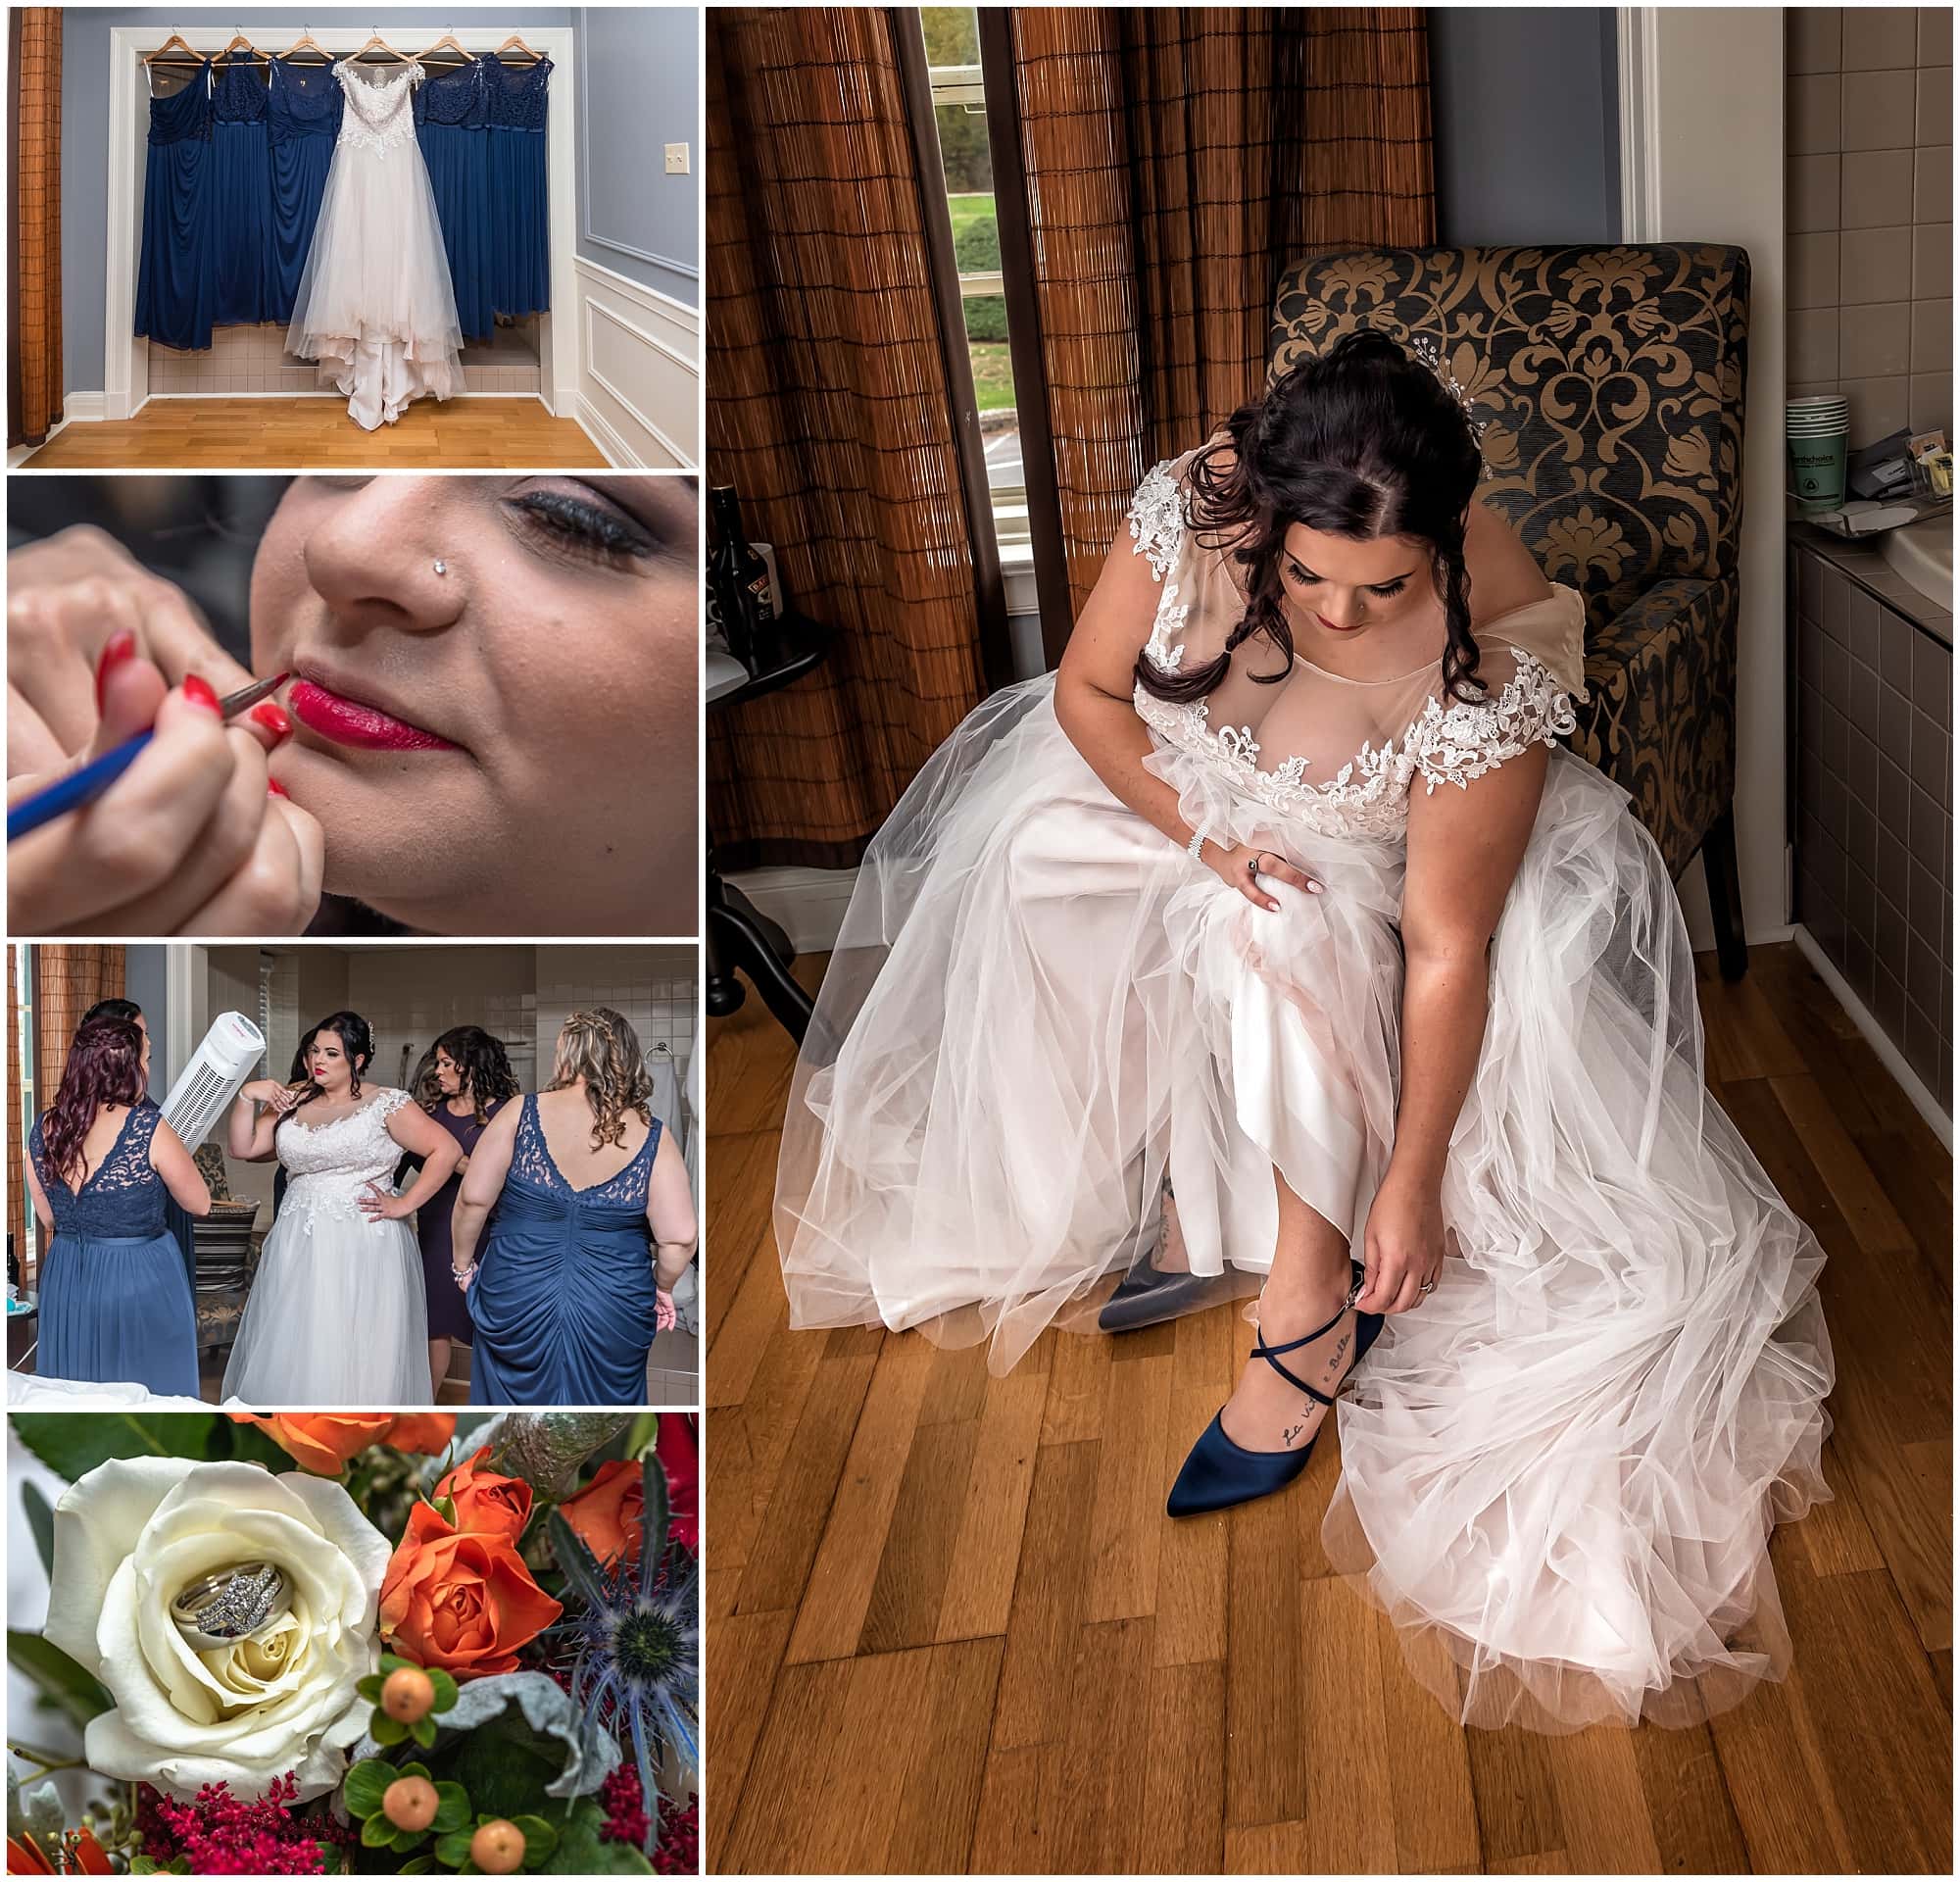 The bridal prep wedding photography coverage prior to the wedding ceremony of the bride getting ready at Digby Pines Resort in Nova Scotia.